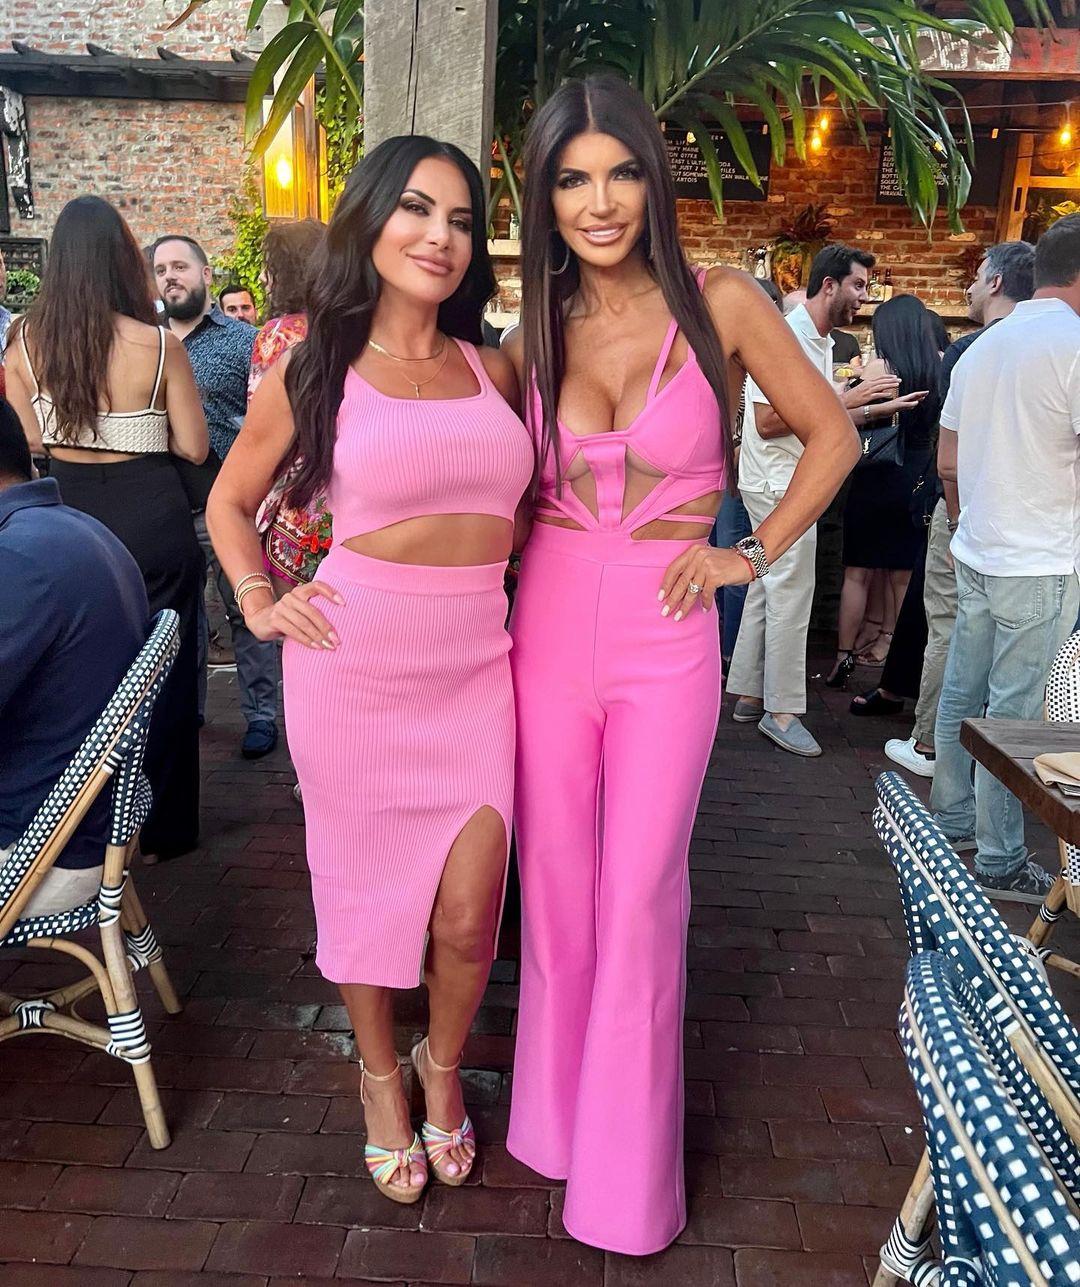 Teresa Giudice's New Photos Spark Ozempic Accusations From Fans: 'Ozempic Barbie'